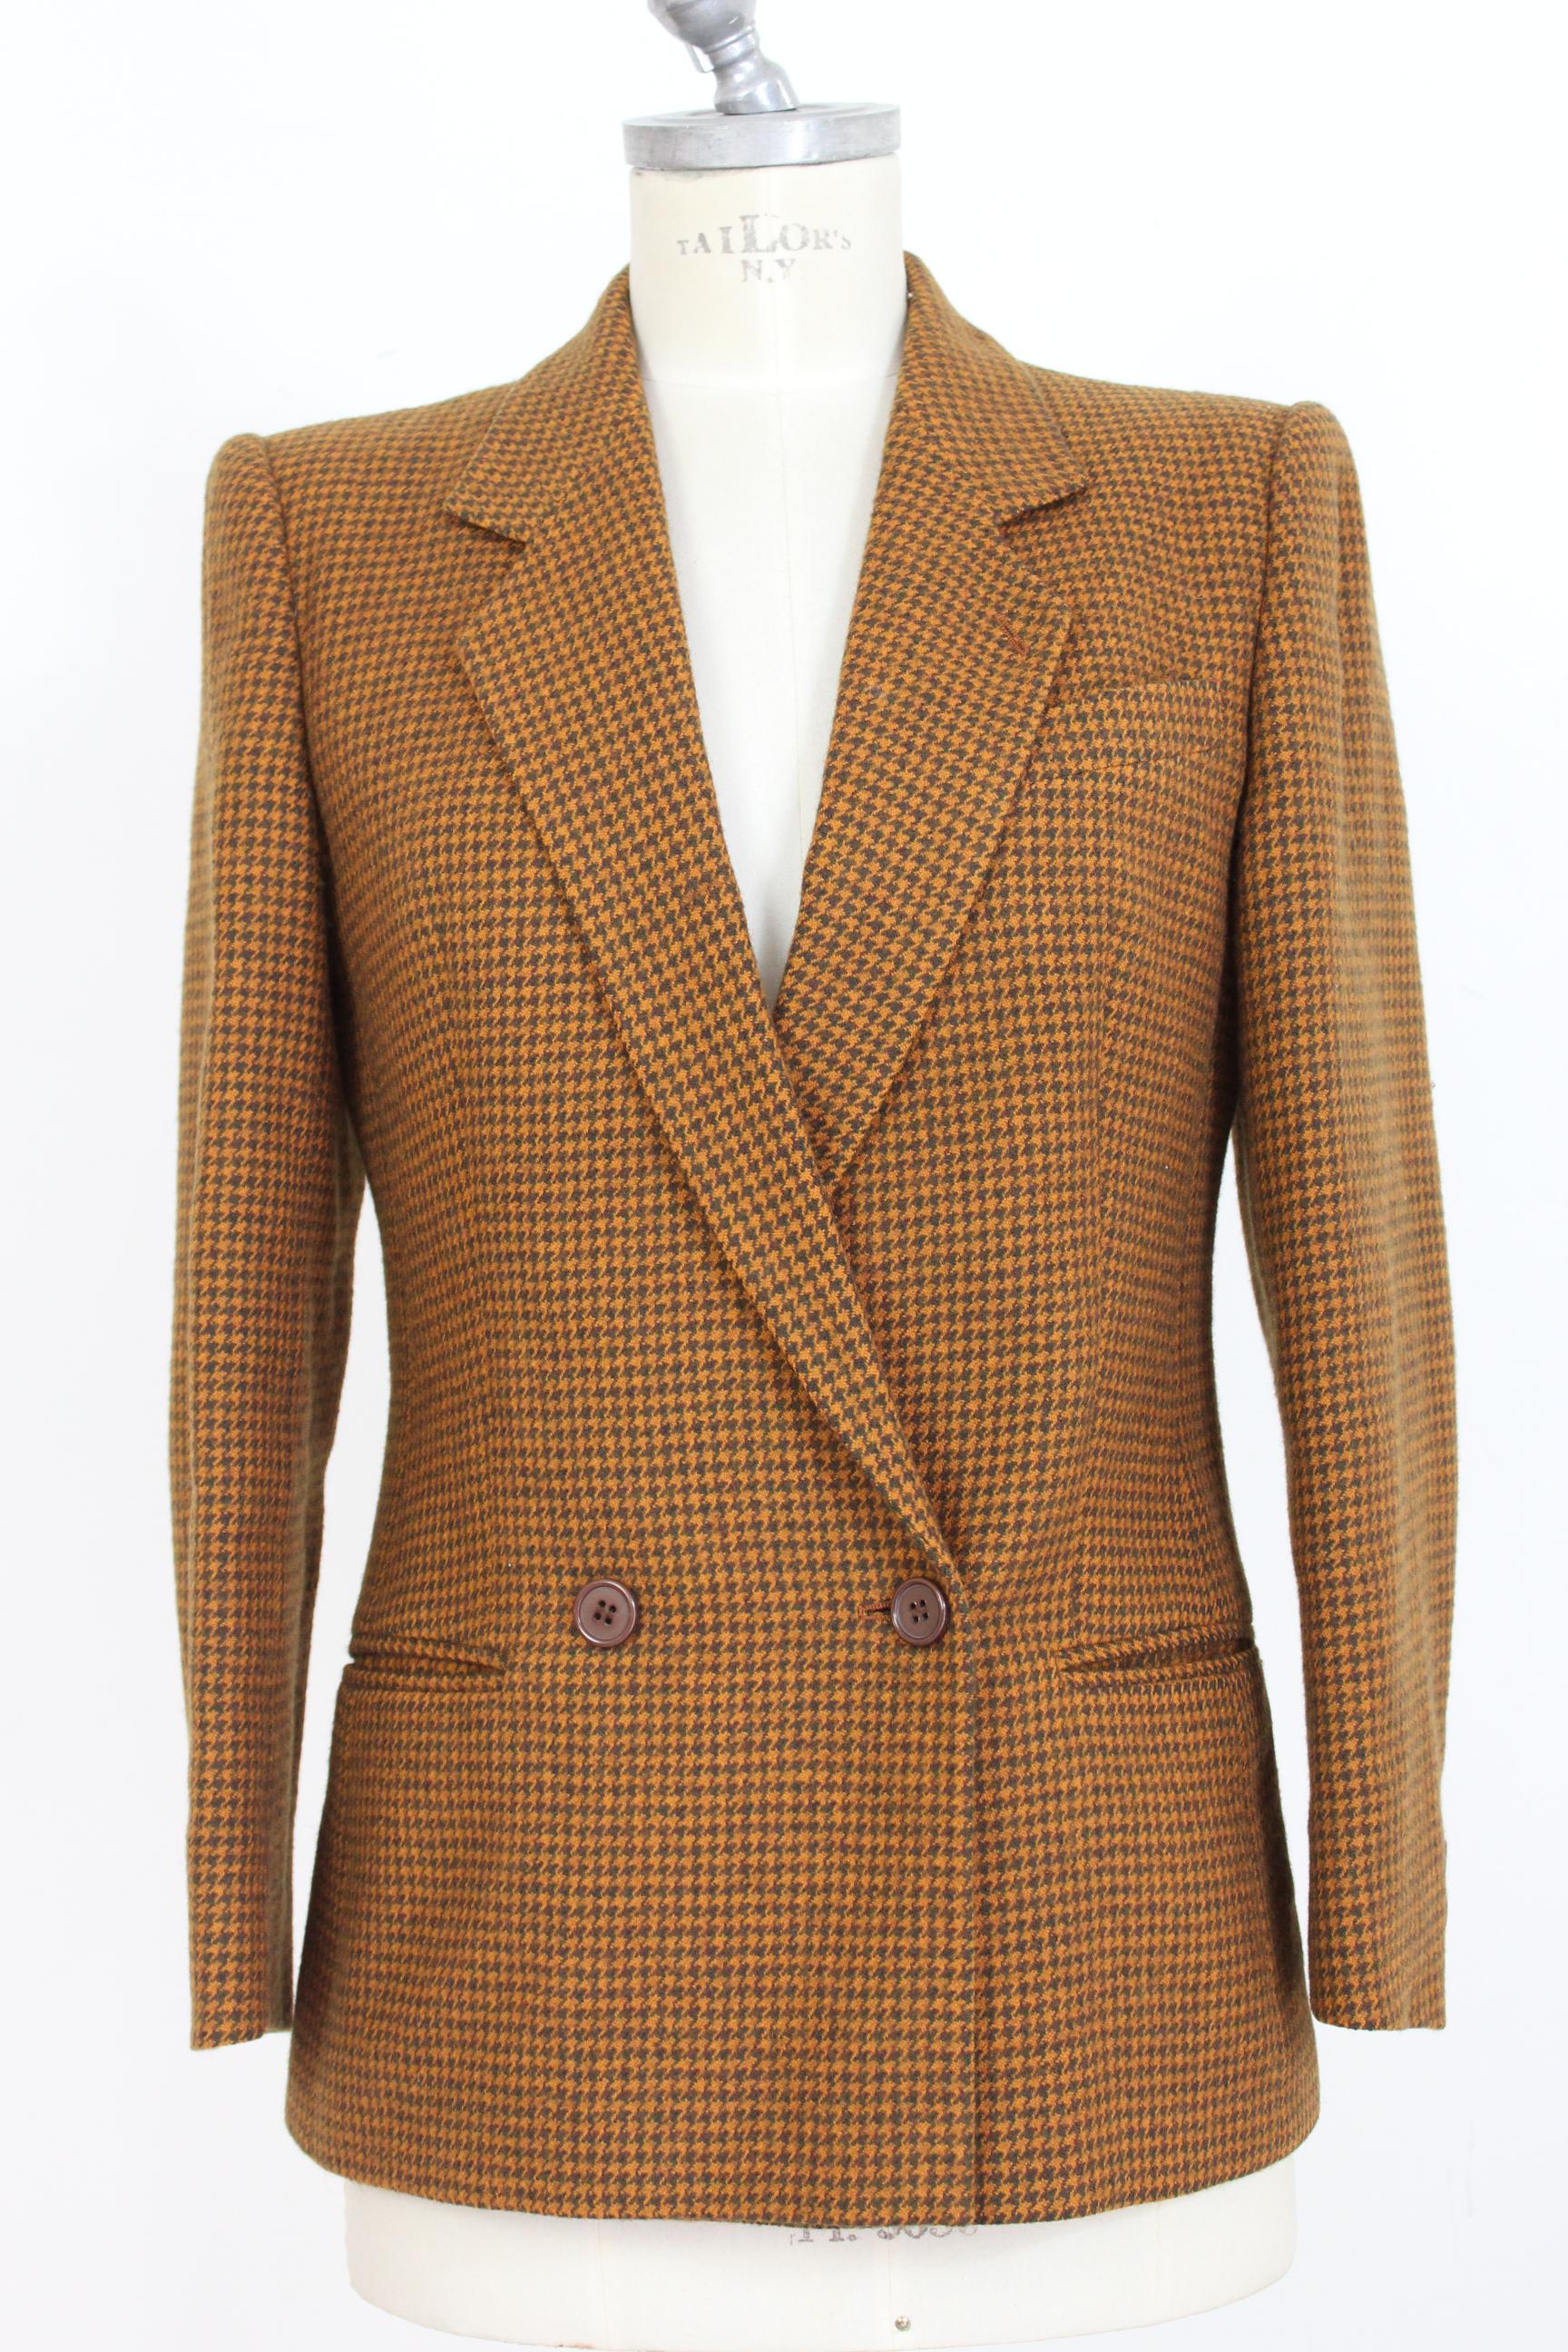 Valentino Miss V Beige Brown Wool Check Double Breasted Jacket Skirt Suit  2